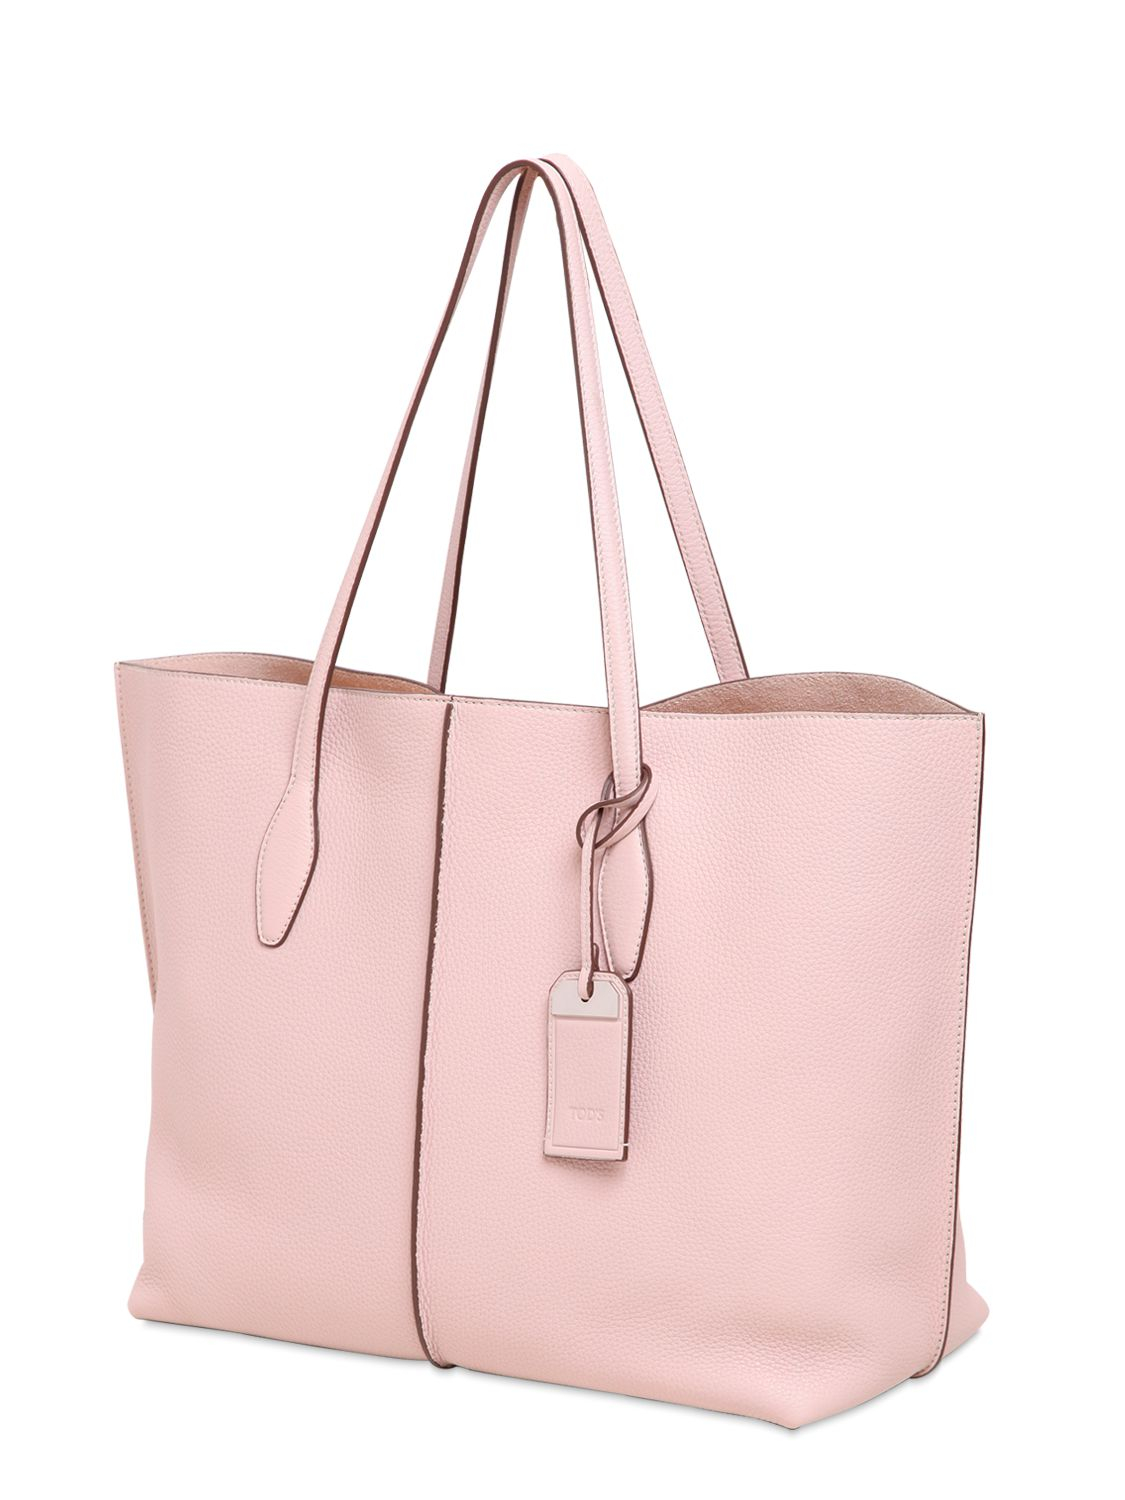 Lyst - Tod'S Large Joy Textured Leather Tote Bag in Pink